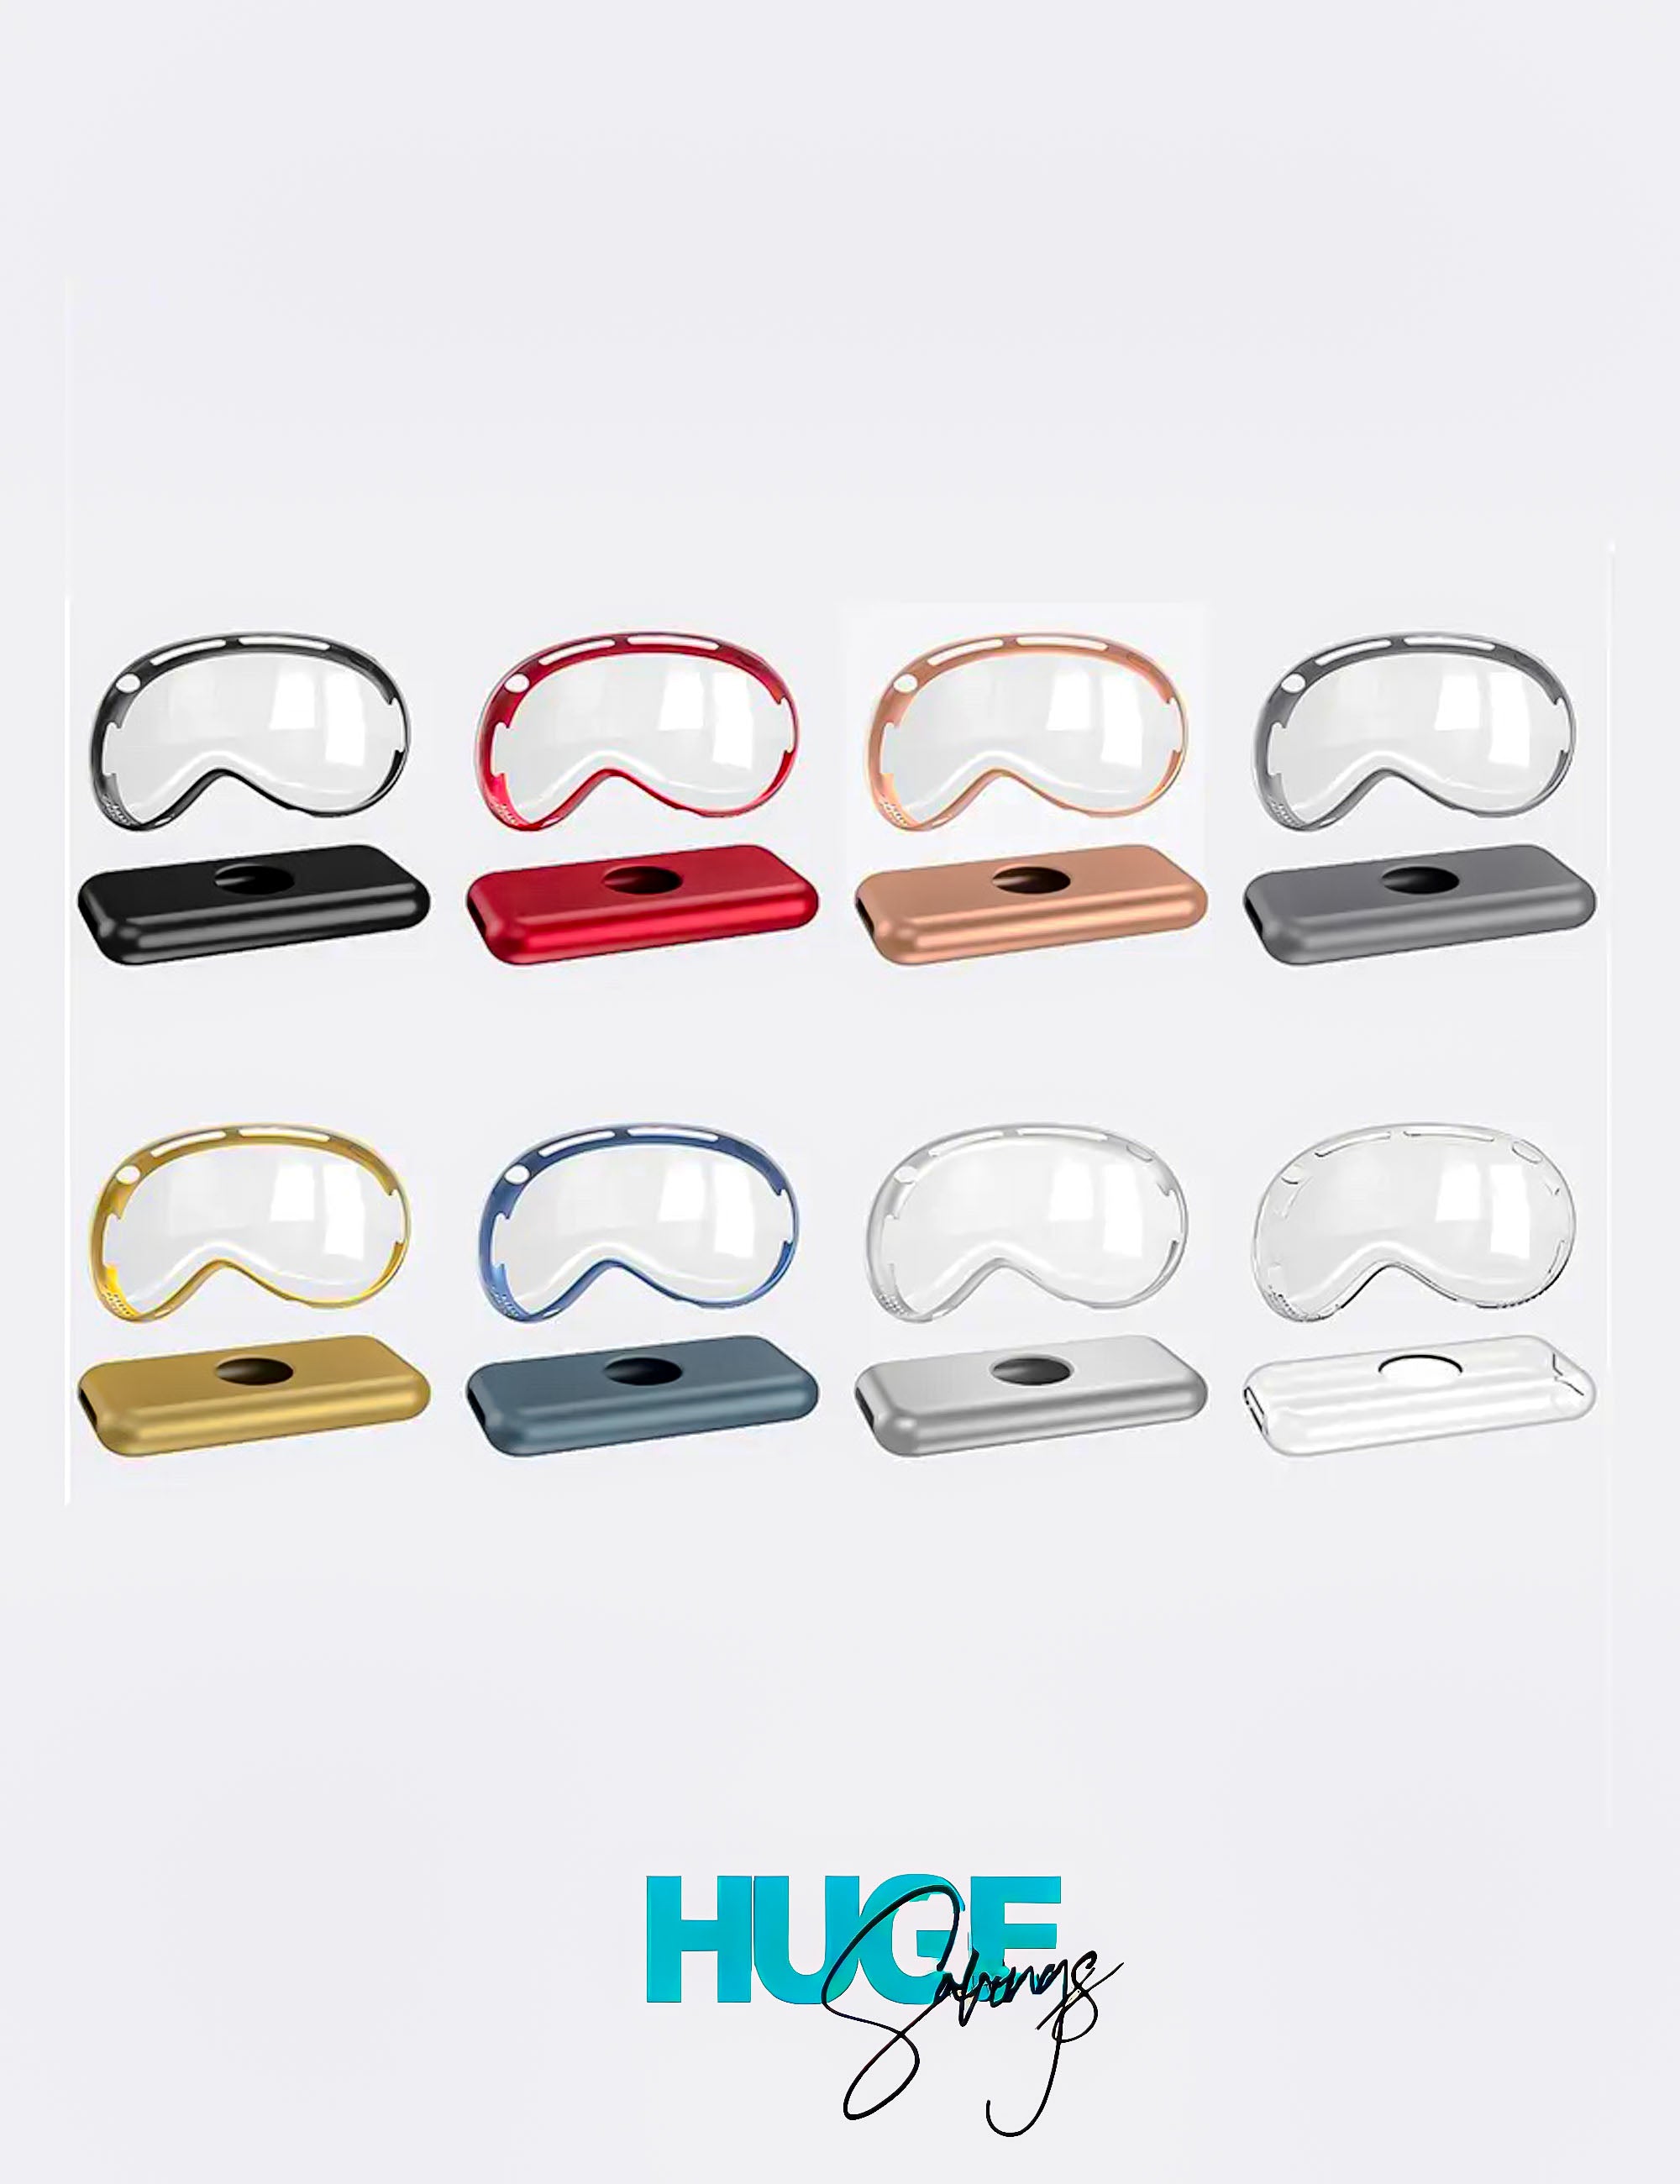 Vision Pro Headset Face Clear Cover Transparent